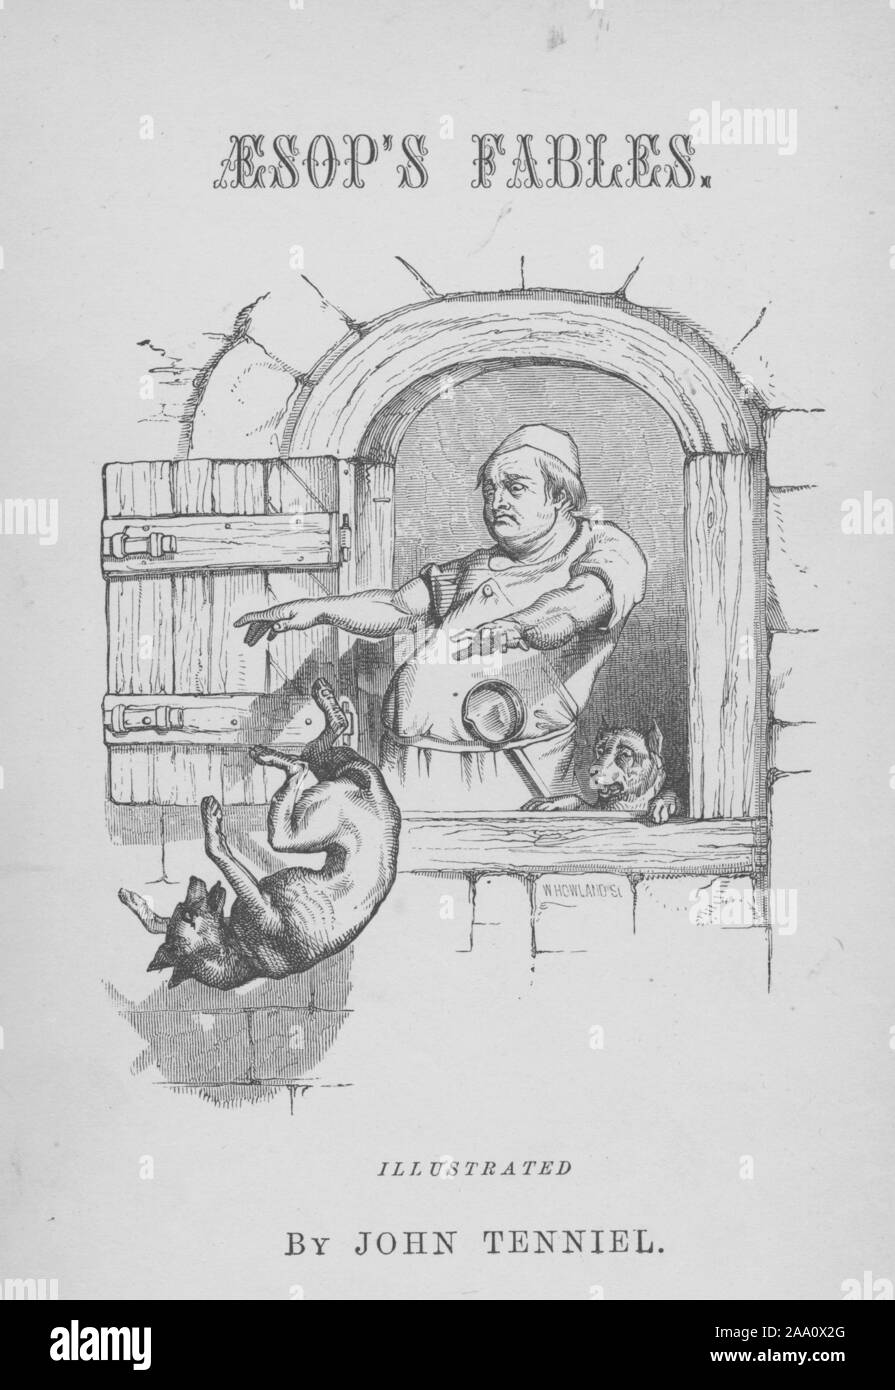 Monochrome illustration of the title page of the book 'Aesop's Fables' by author Reverend Thomas James, featuring a cook throwing a dog out the window, illustrated by John Tenniel, engraved by William Howland, published by Collins and Brother, 1848. From the New York Public Library. () Stock Photo